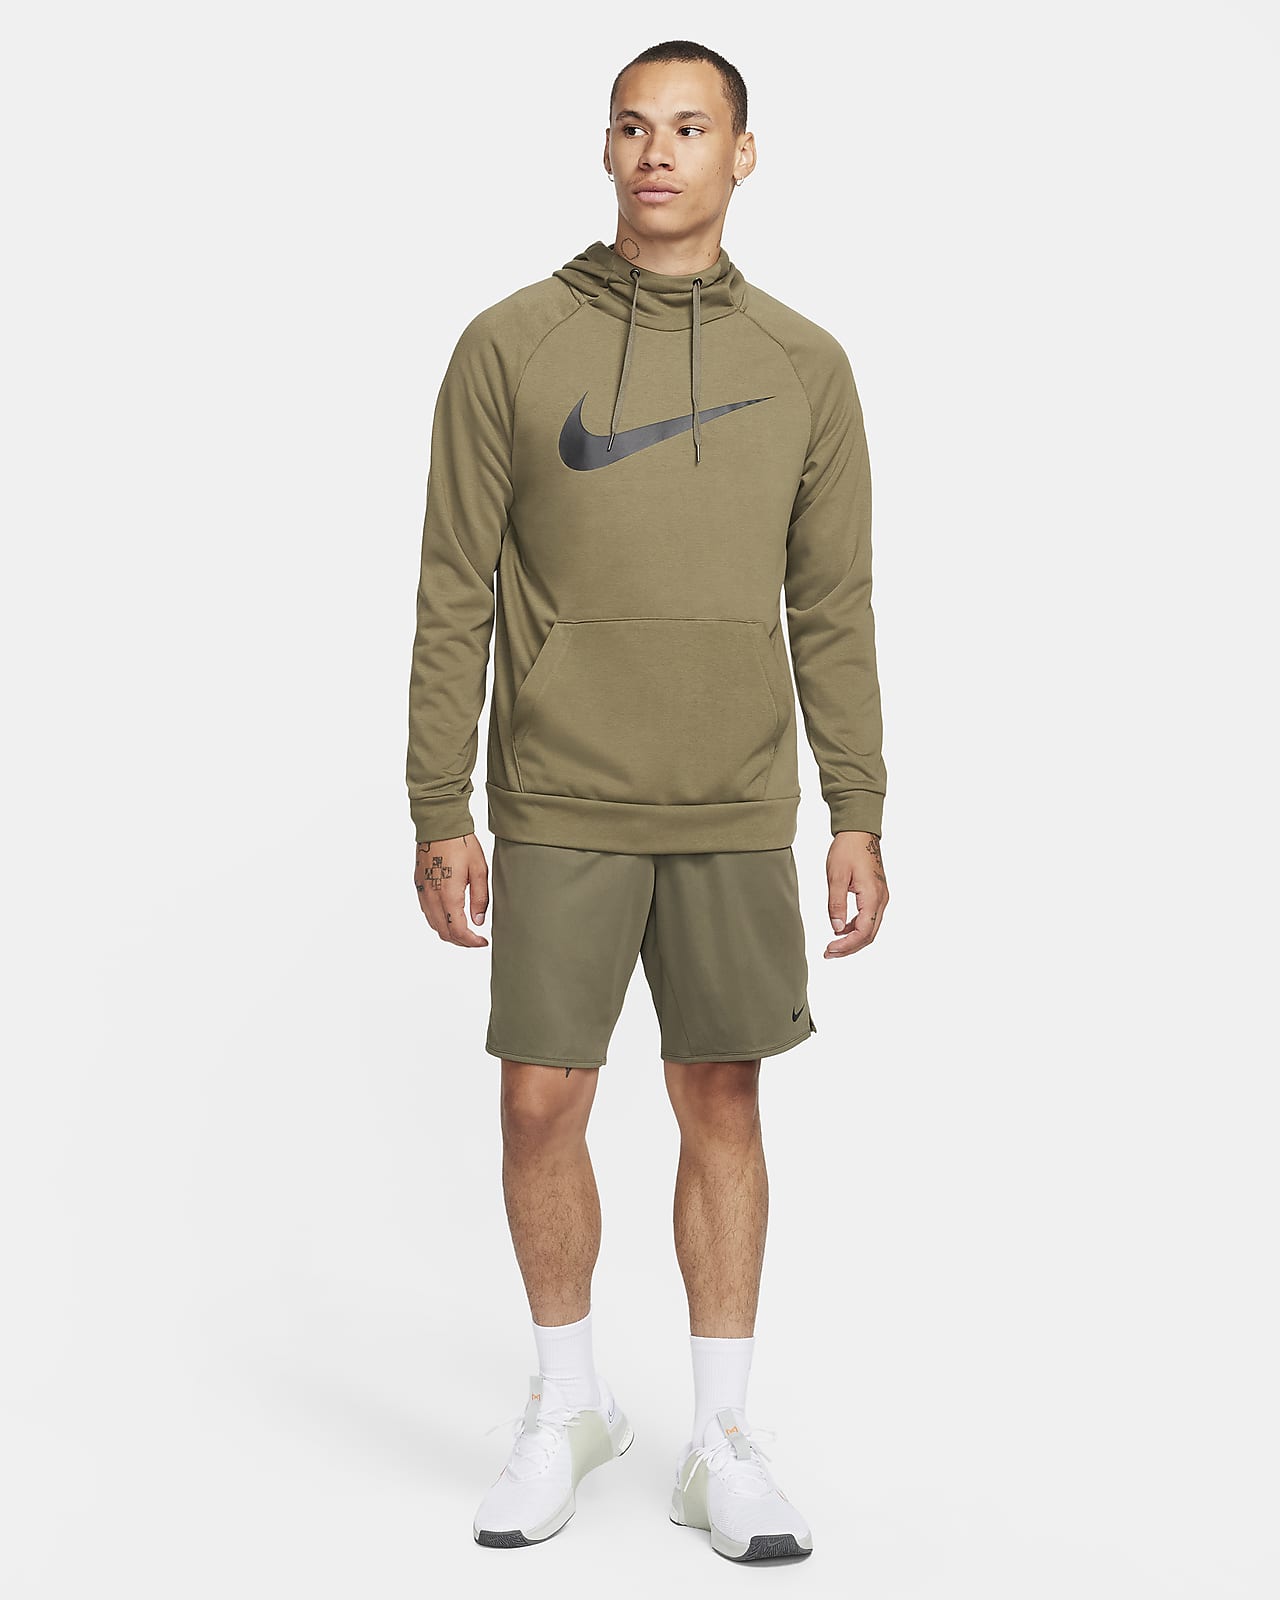 https://static.nike.com/a/images/t_PDP_1280_v1/f_auto,q_auto:eco/d24c5e4d-7a67-459b-9cc0-a5259f6b2e12/dry-graphic-dri-fit-hooded-fitness-pullover-hoodie-F2vK6b.png